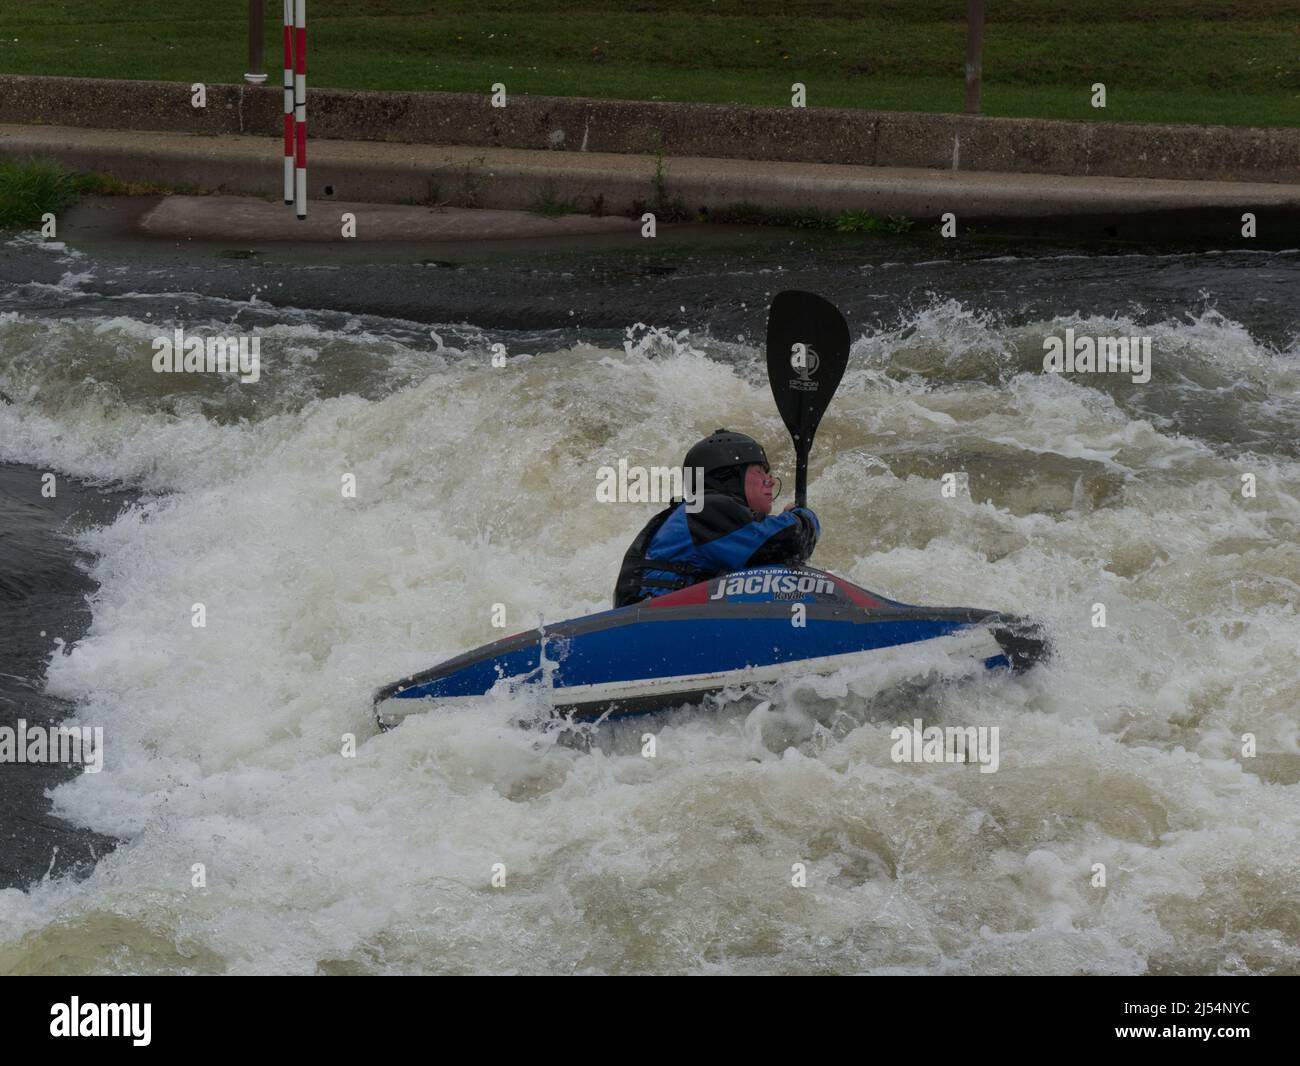 Young boy in Jackson kayak tackling white water of Holme Pierrepont Country Park Nottingham England UK paddling against current National Water Sports Stock Photo